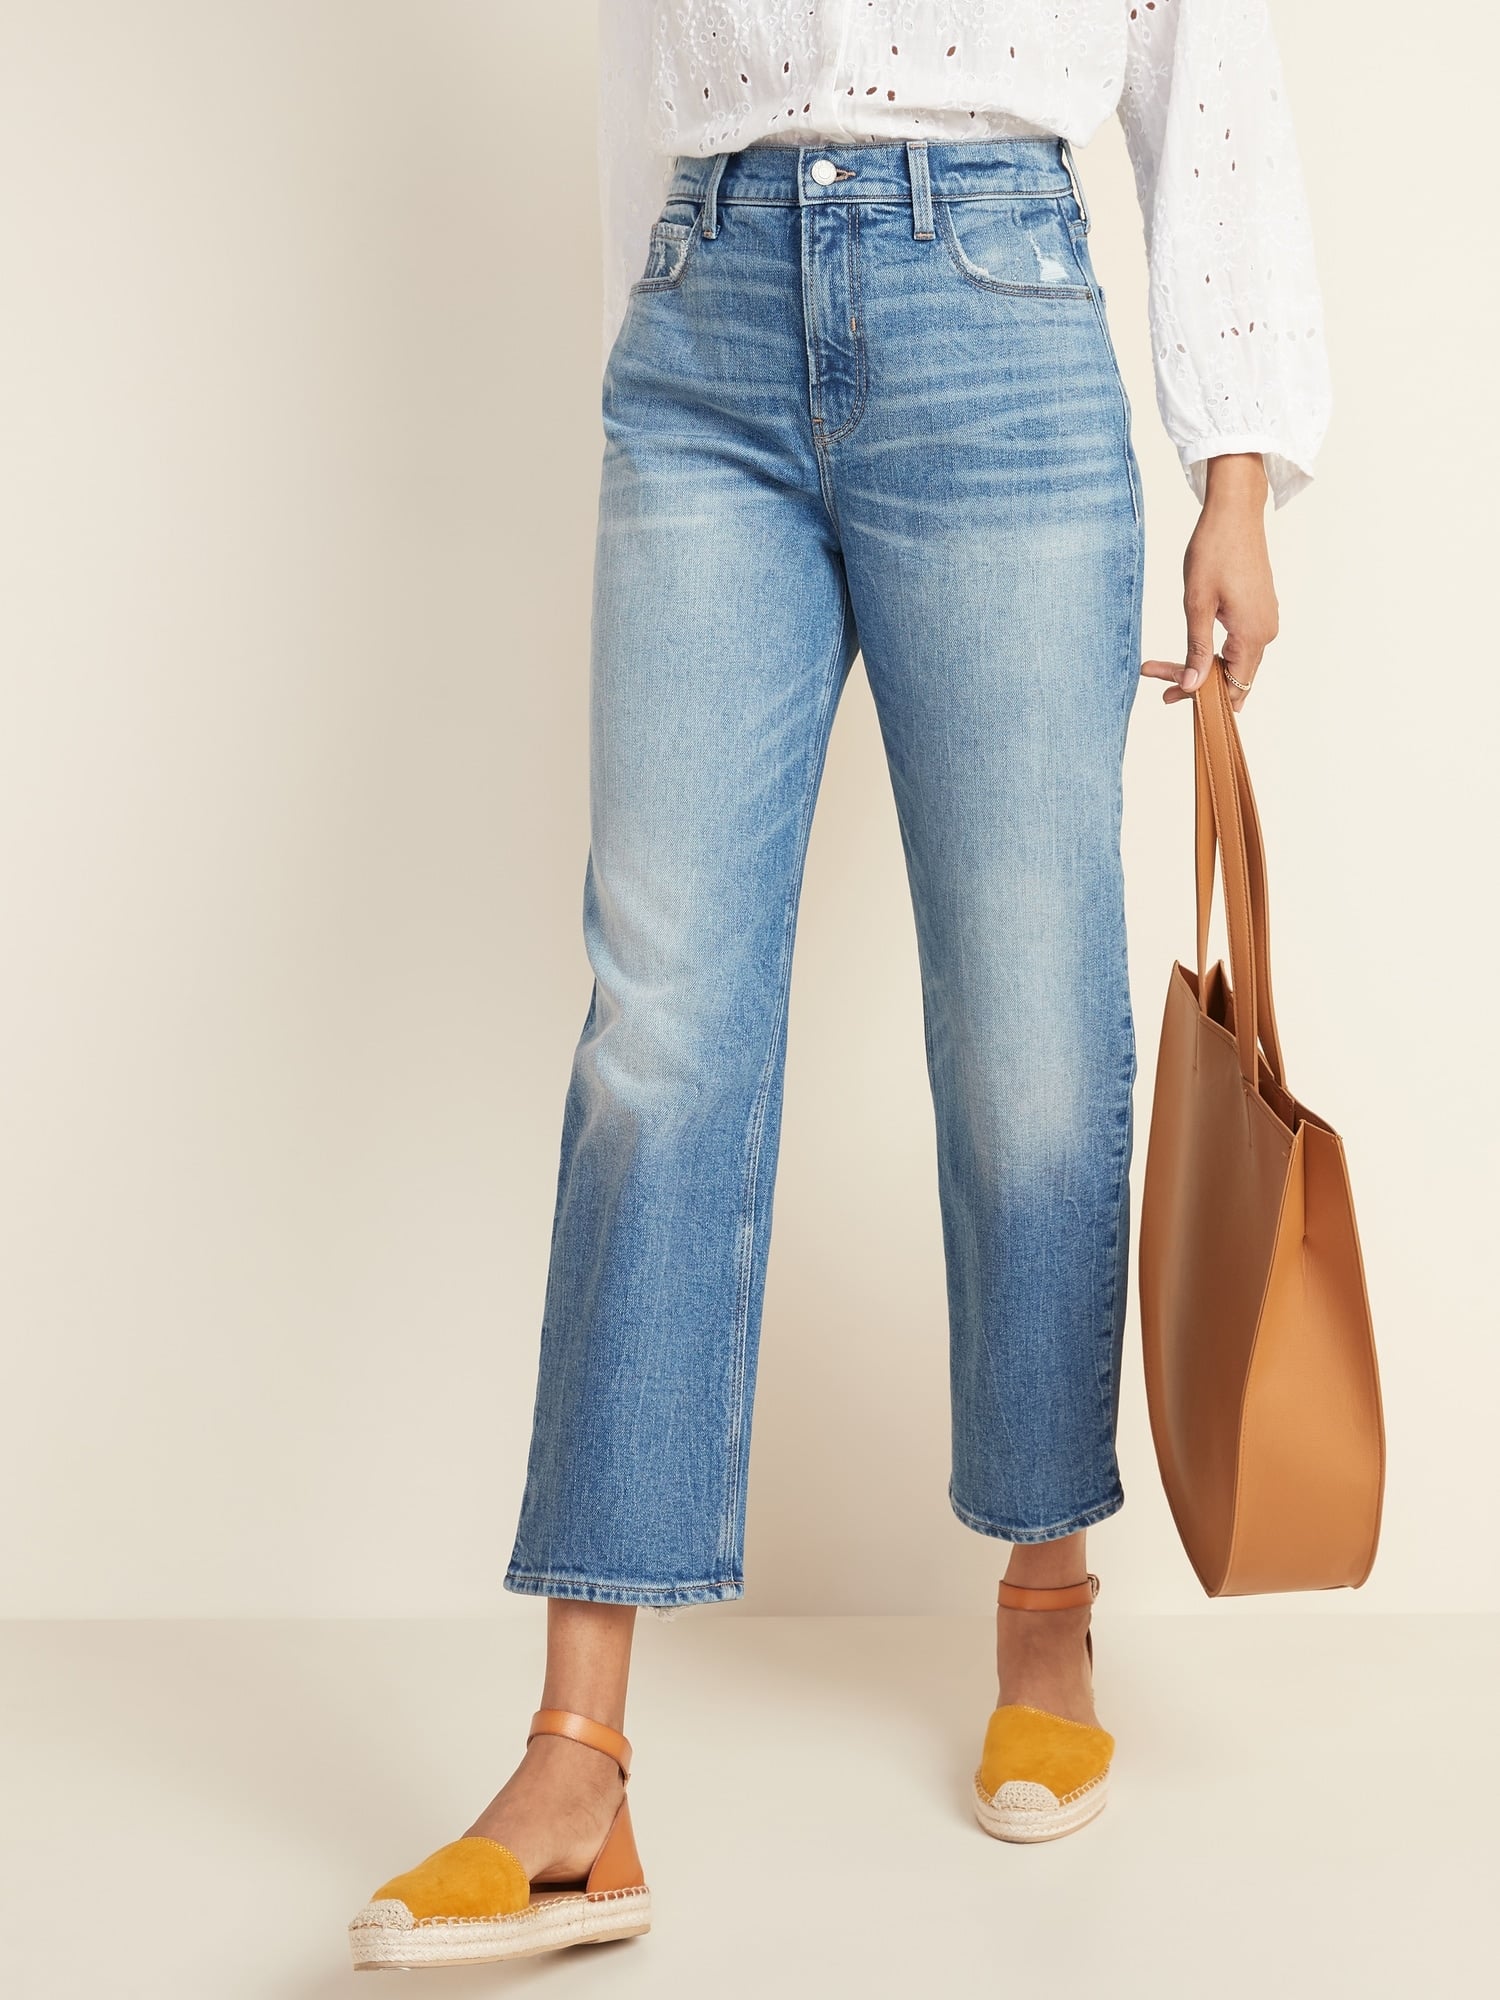 old navy high rise jeans